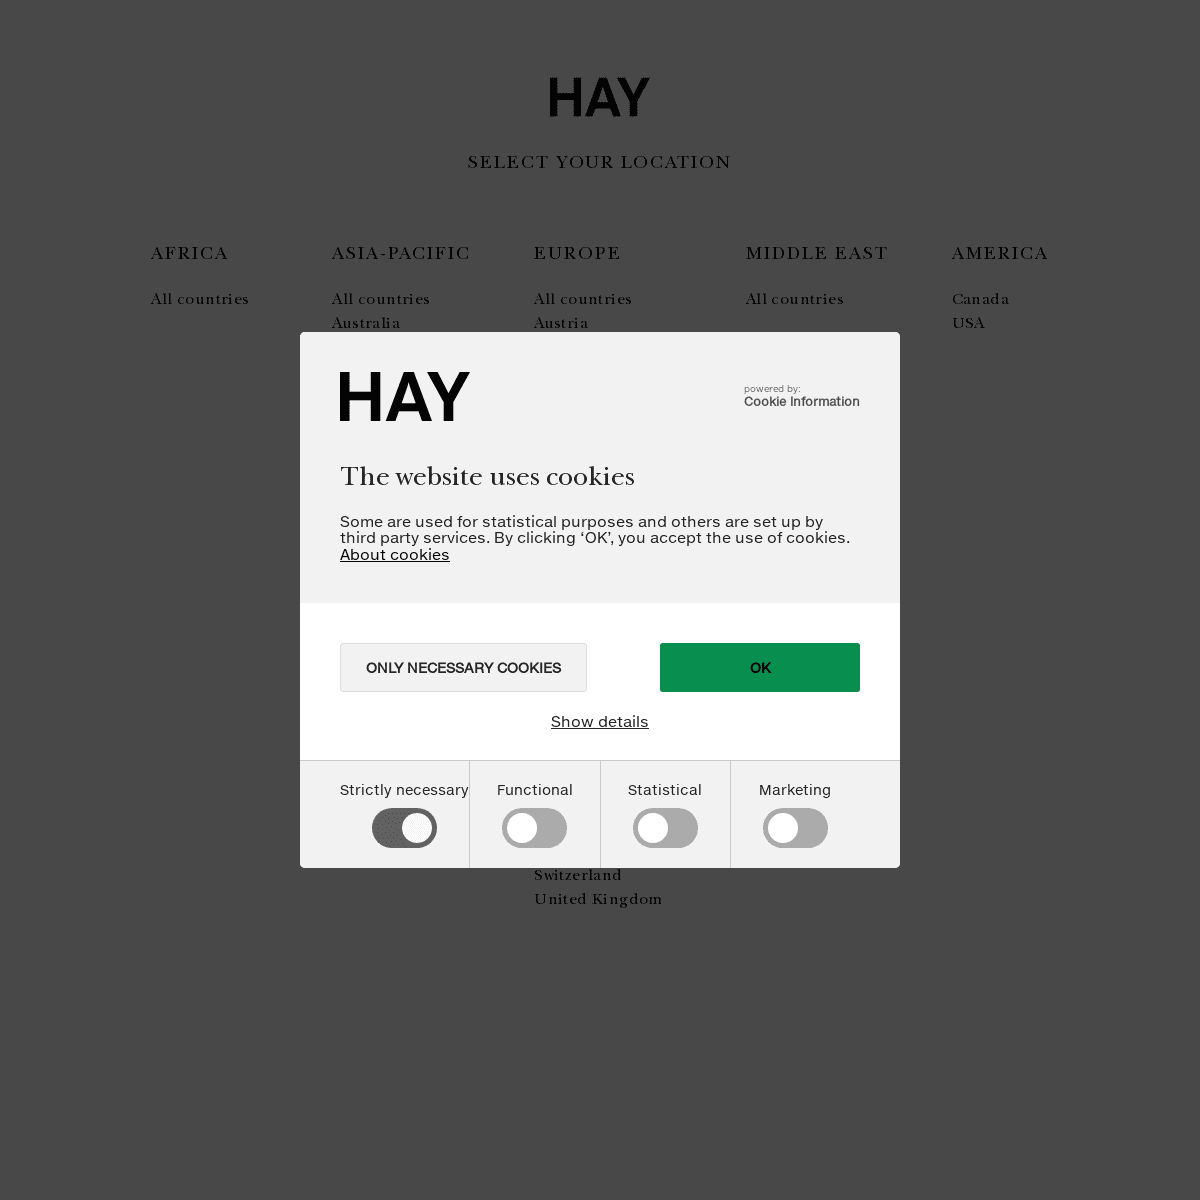 A complete backup of https://hay.dk